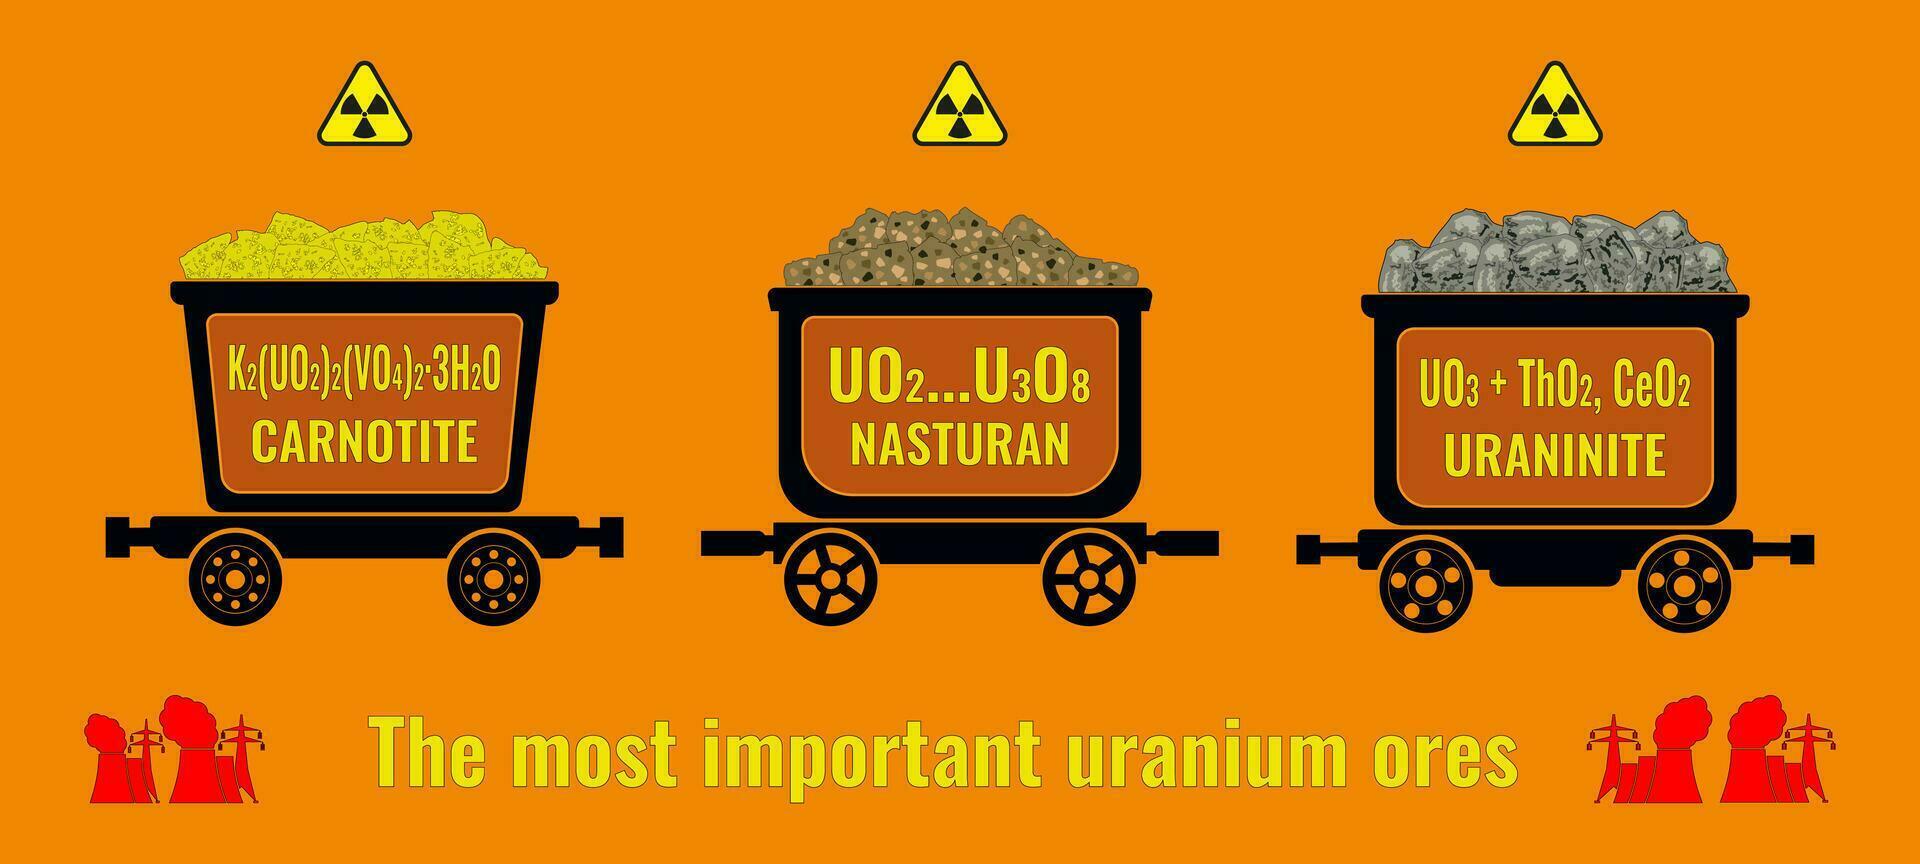 Set of vector illustrations of mining carts with uranium ore in various forms with chemical formulas and names.